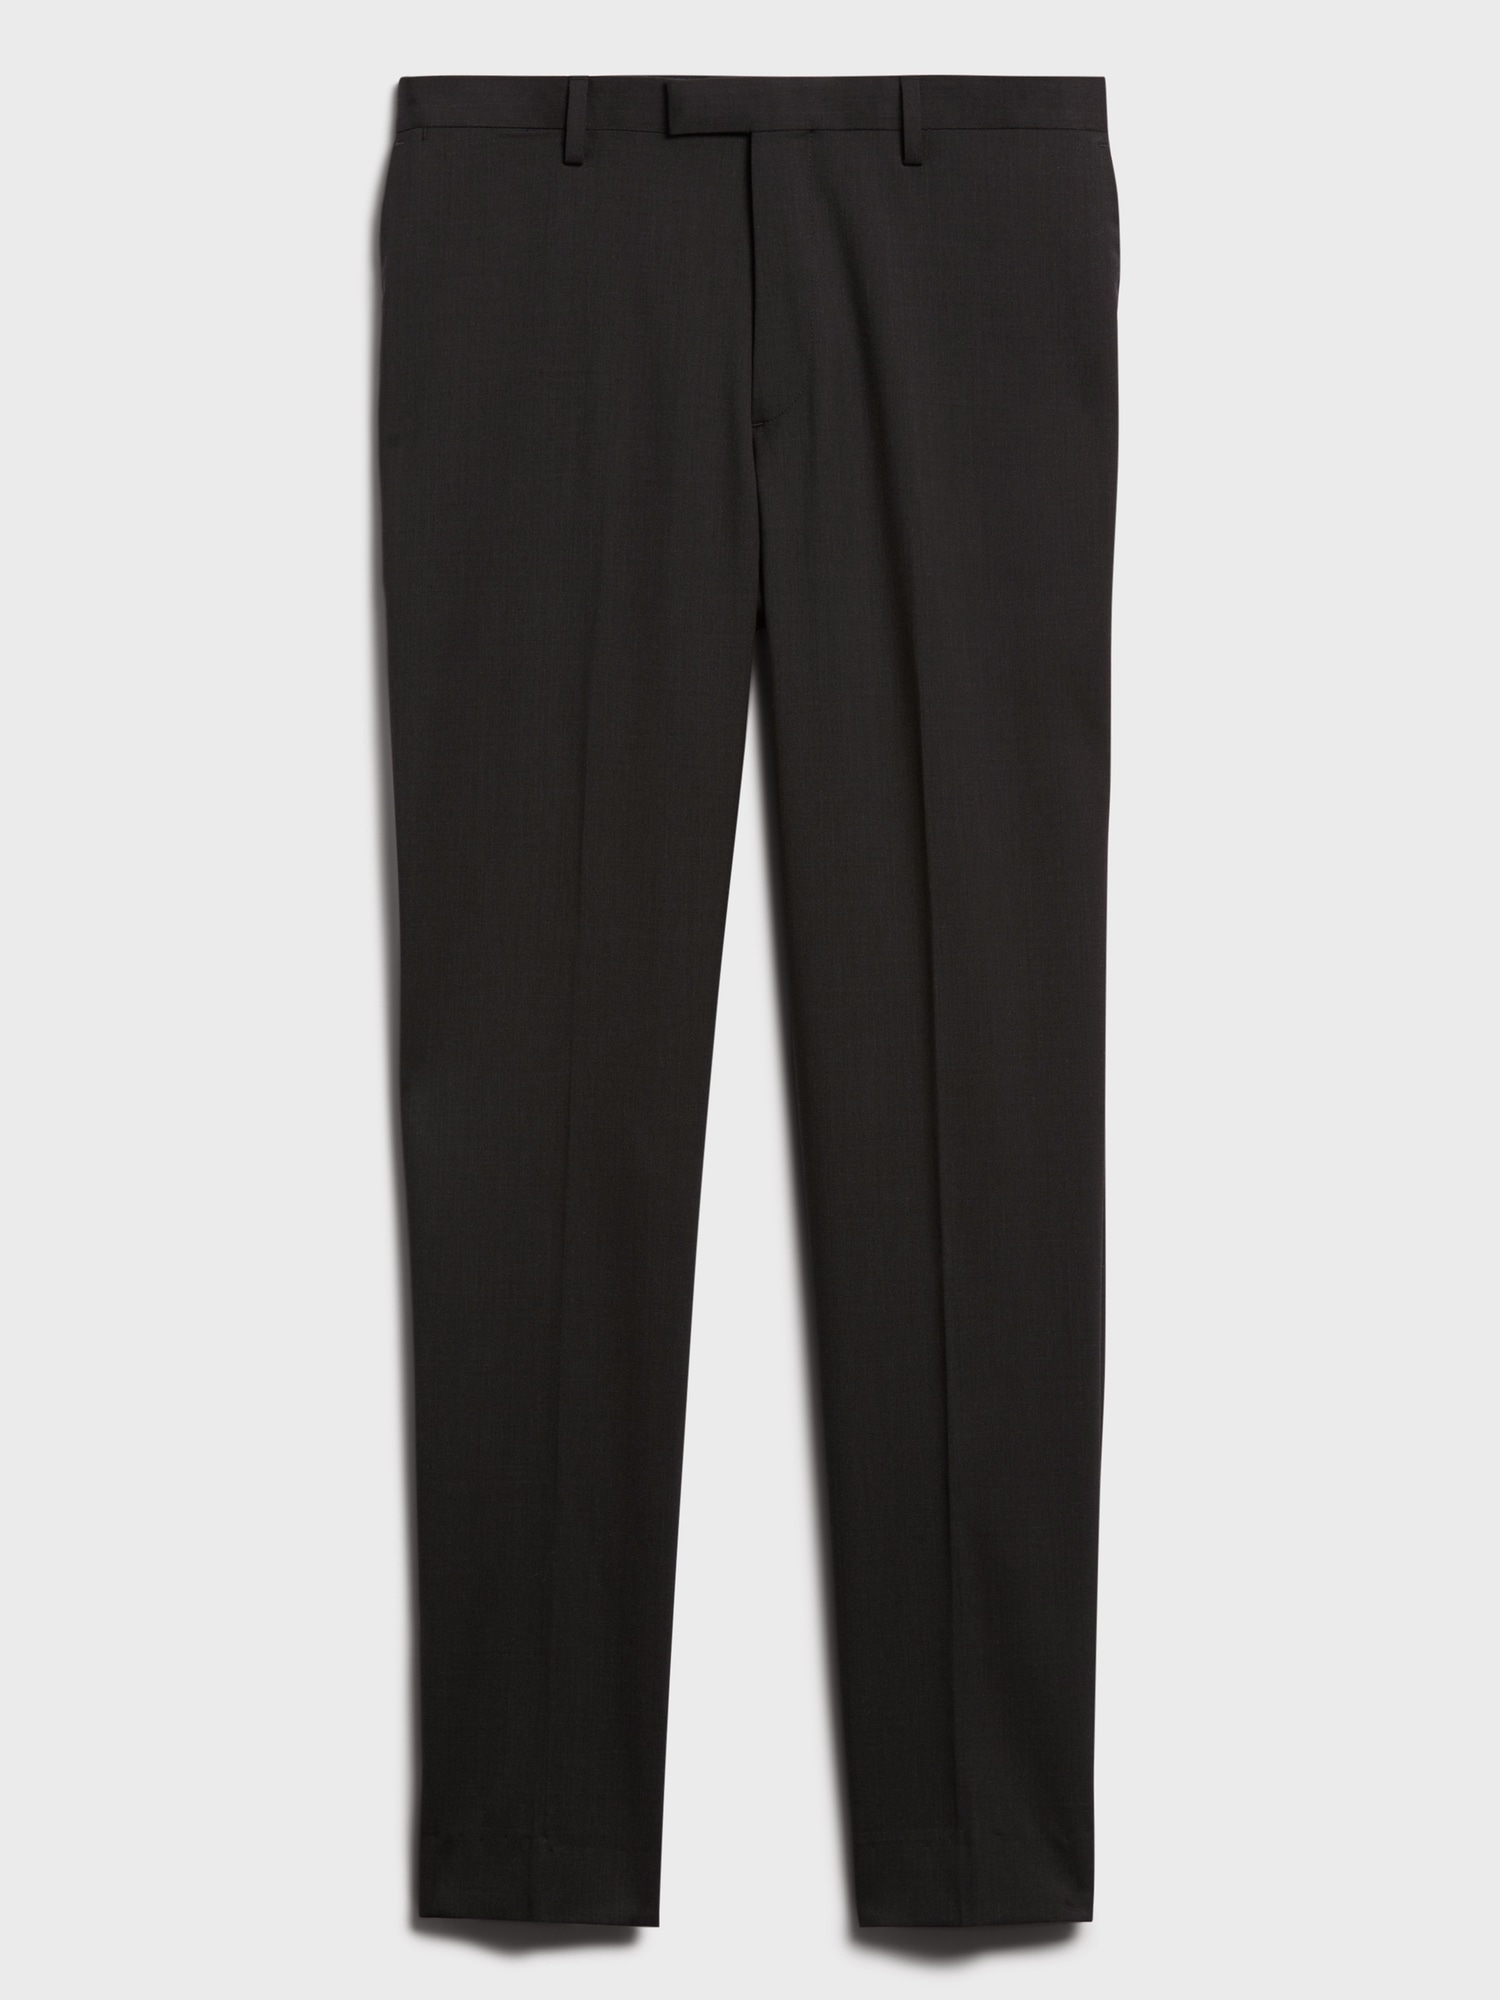 Banana Republic Factory Bright Celery Sloan Crop Pants | Best Price and  Reviews | Zulily